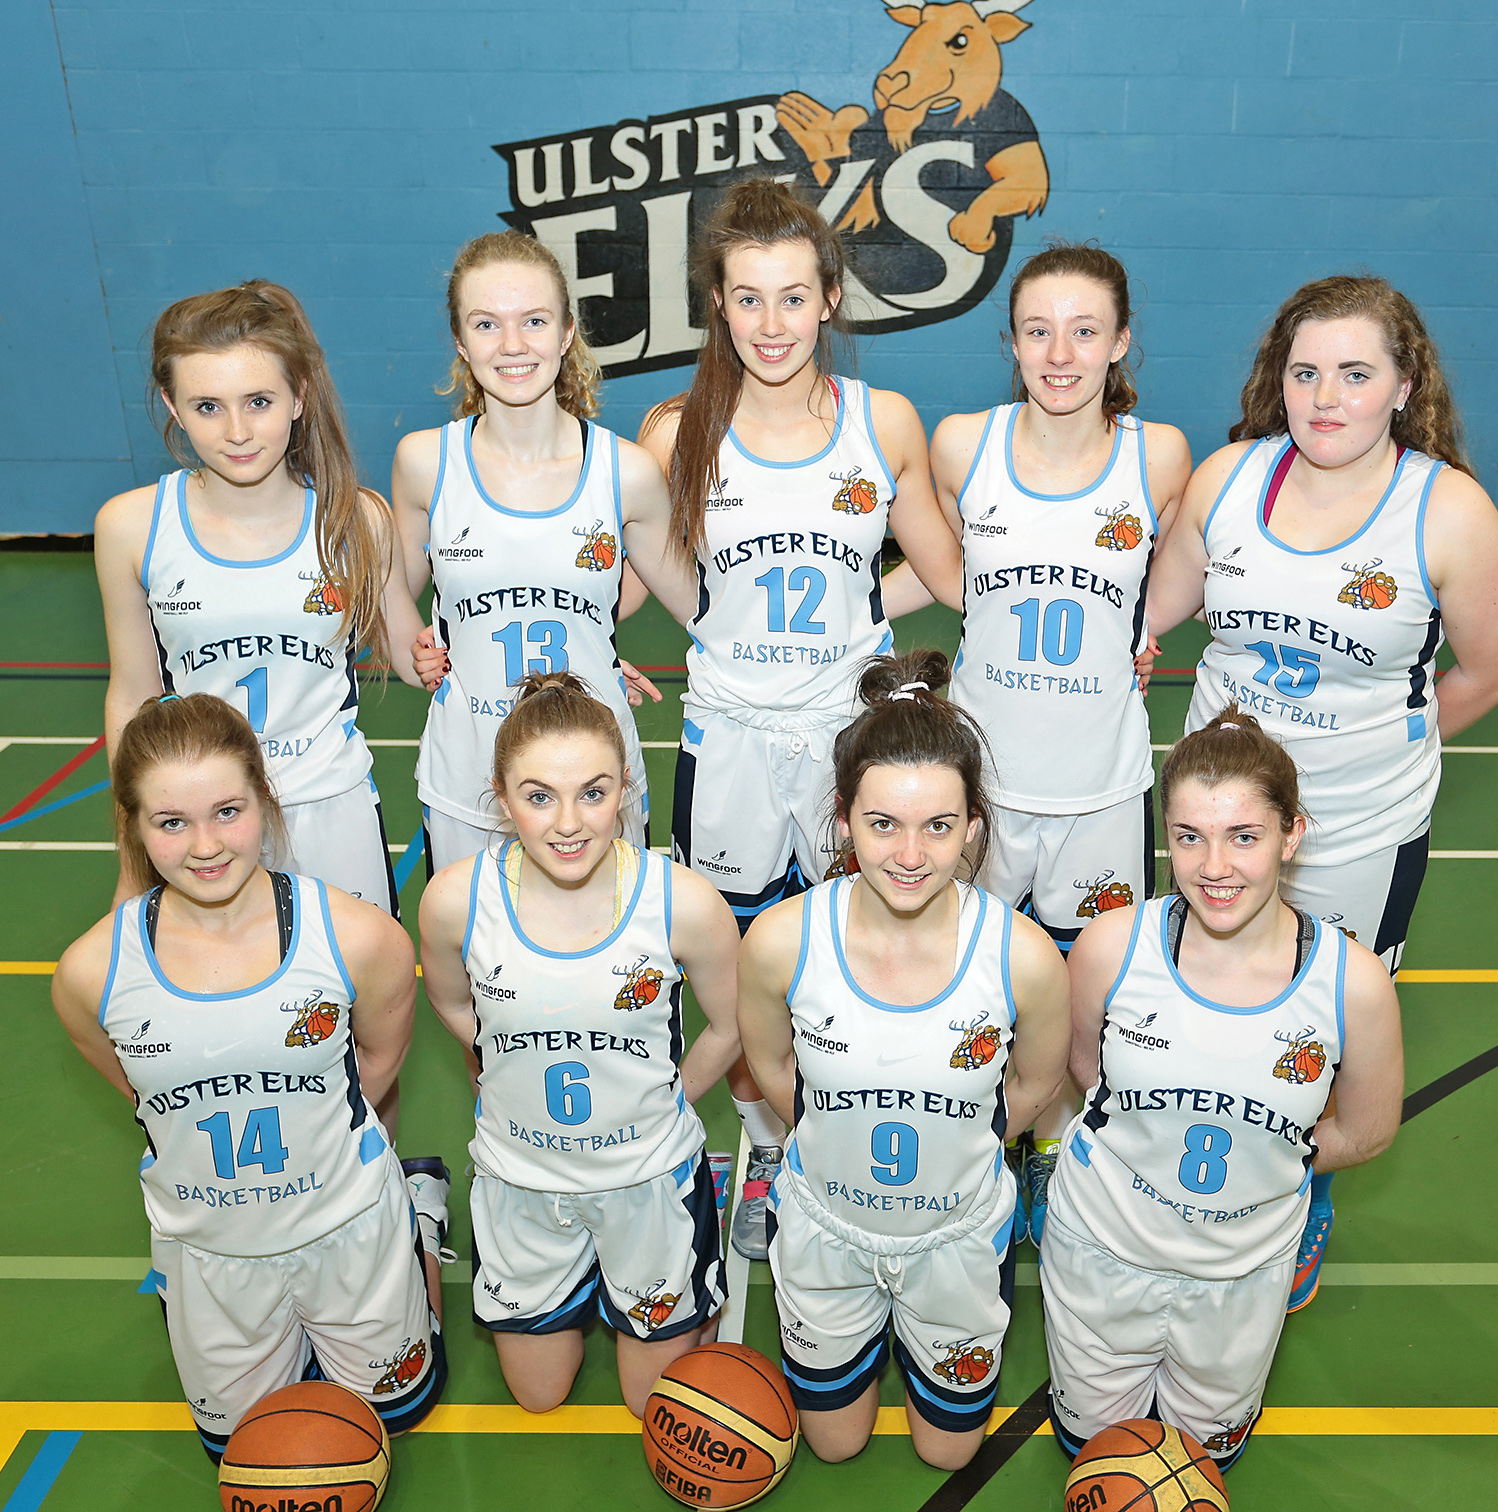 Ulster Elks have swept all before them in the past year – now they’re facing the cream of Irish basketball